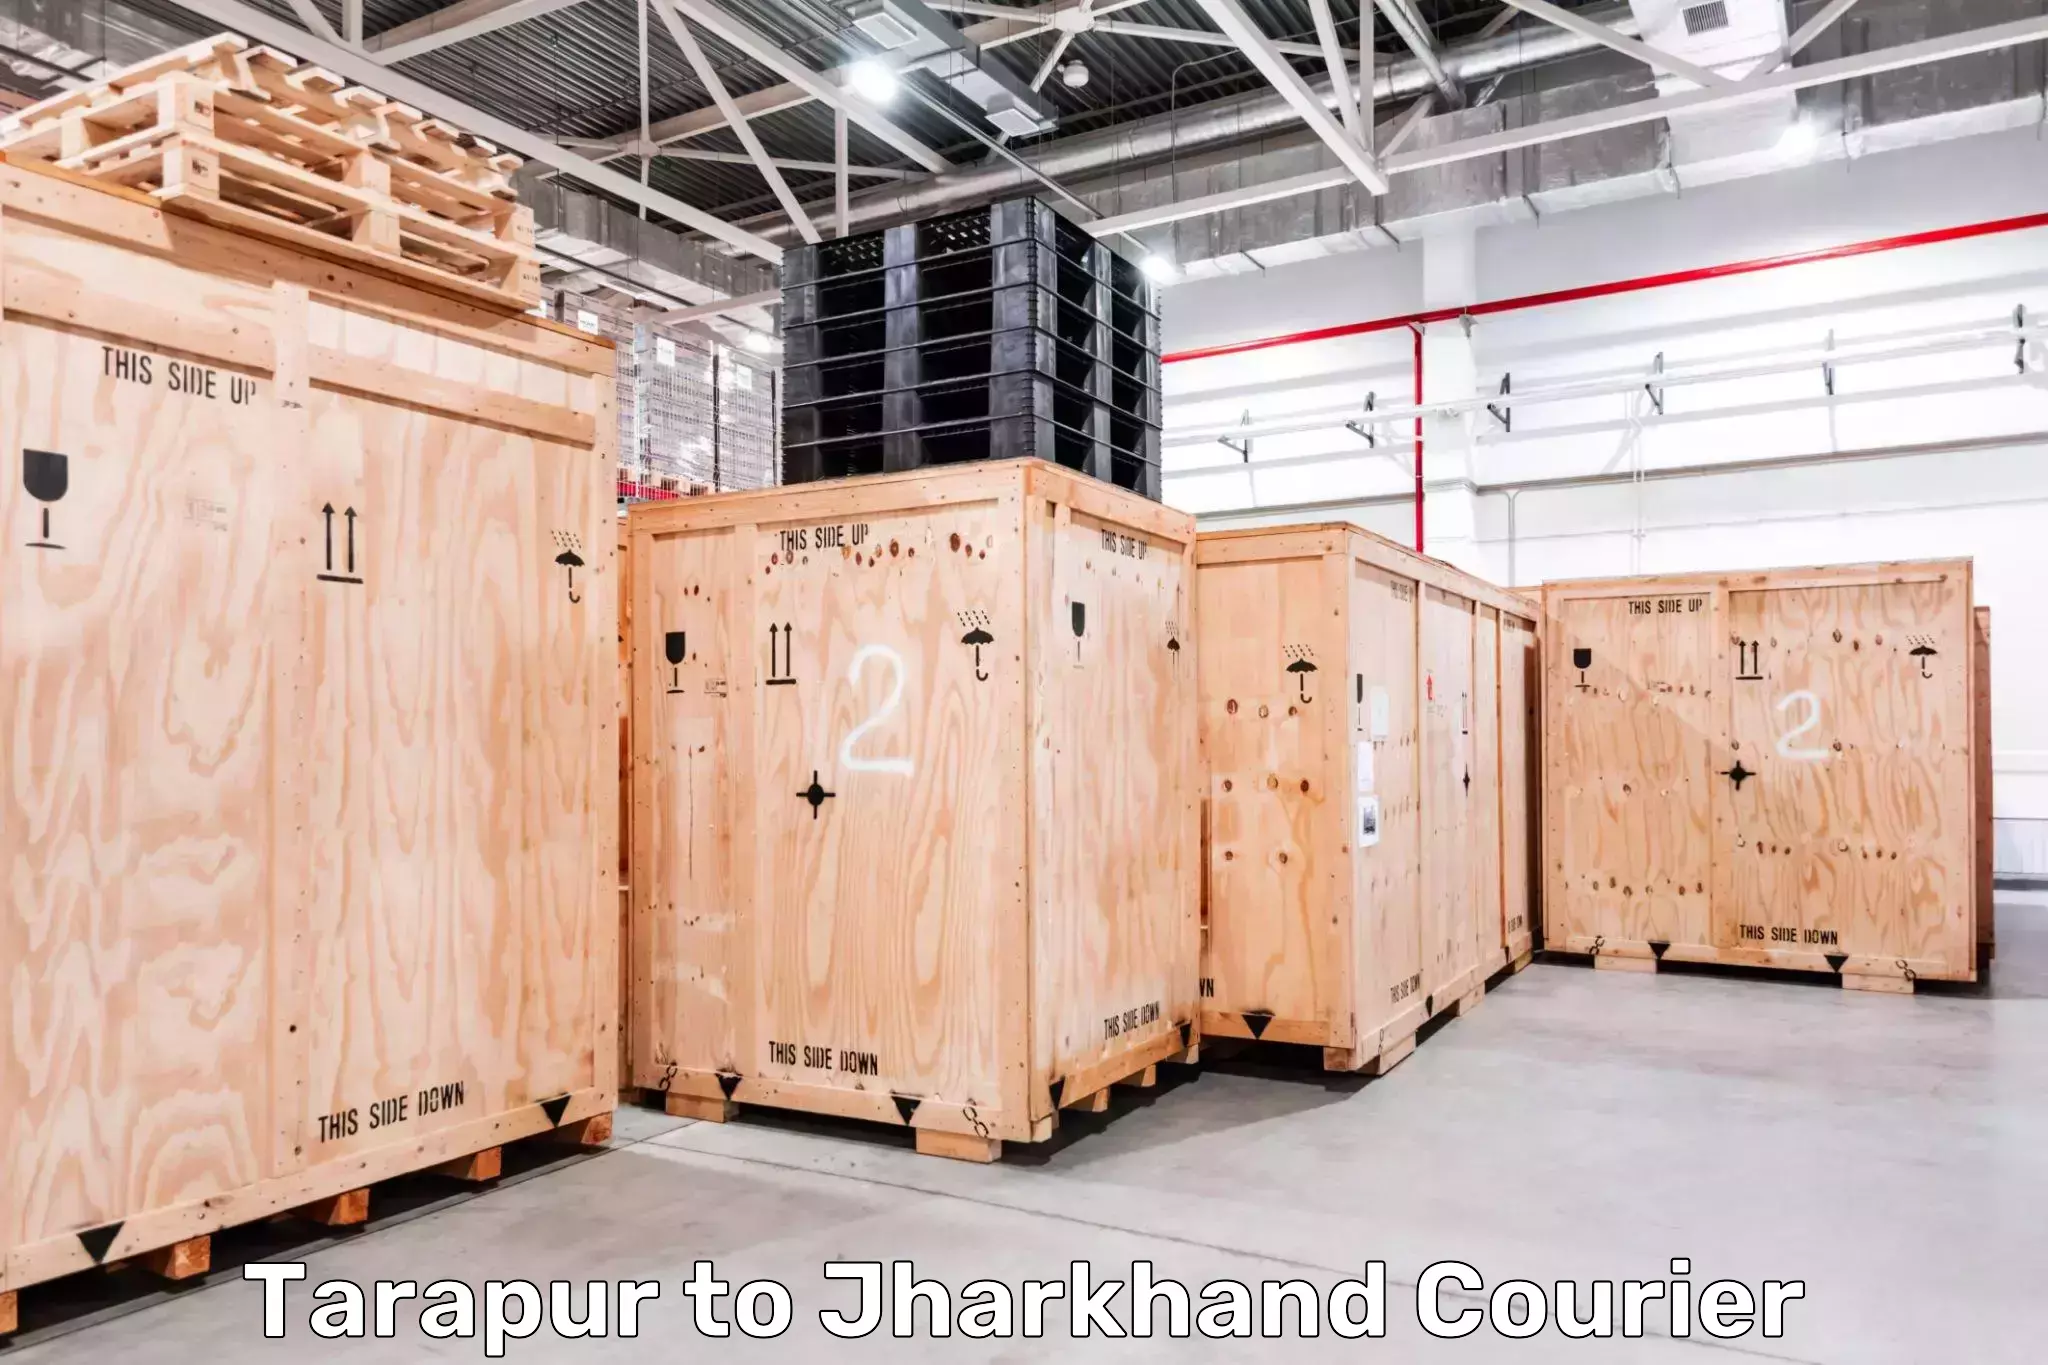 Automated parcel services Tarapur to Jamshedpur